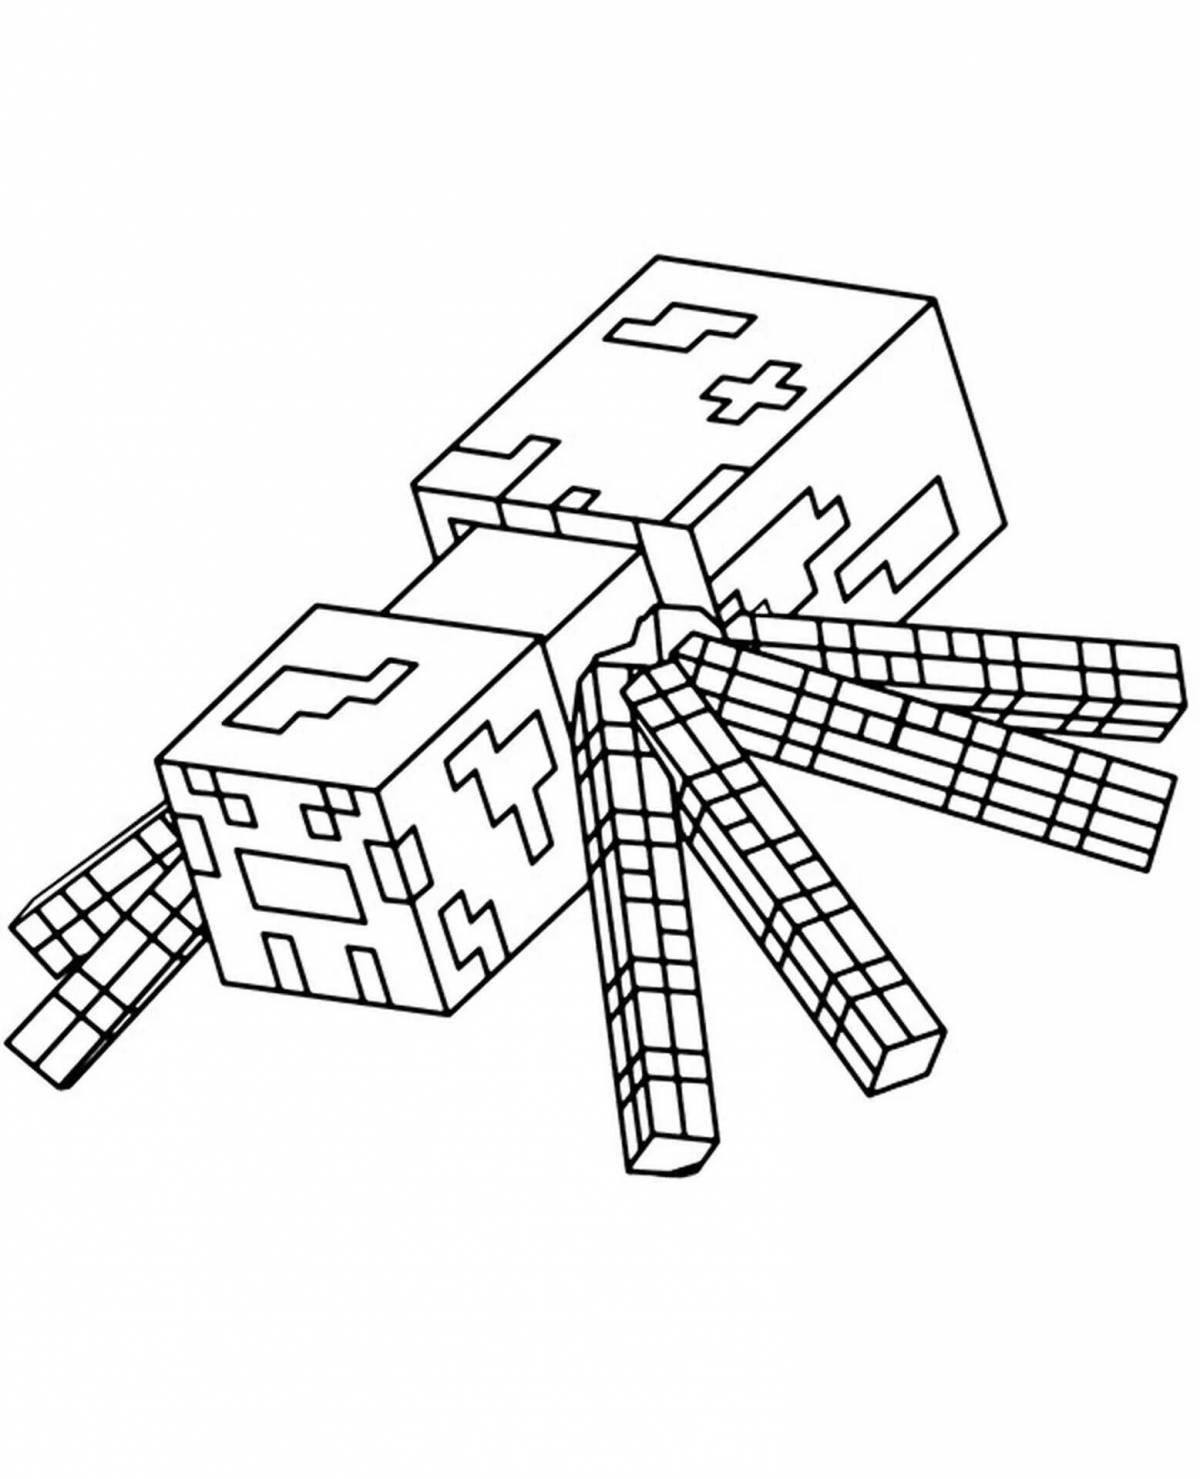 Tempting vizer minecraft coloring page